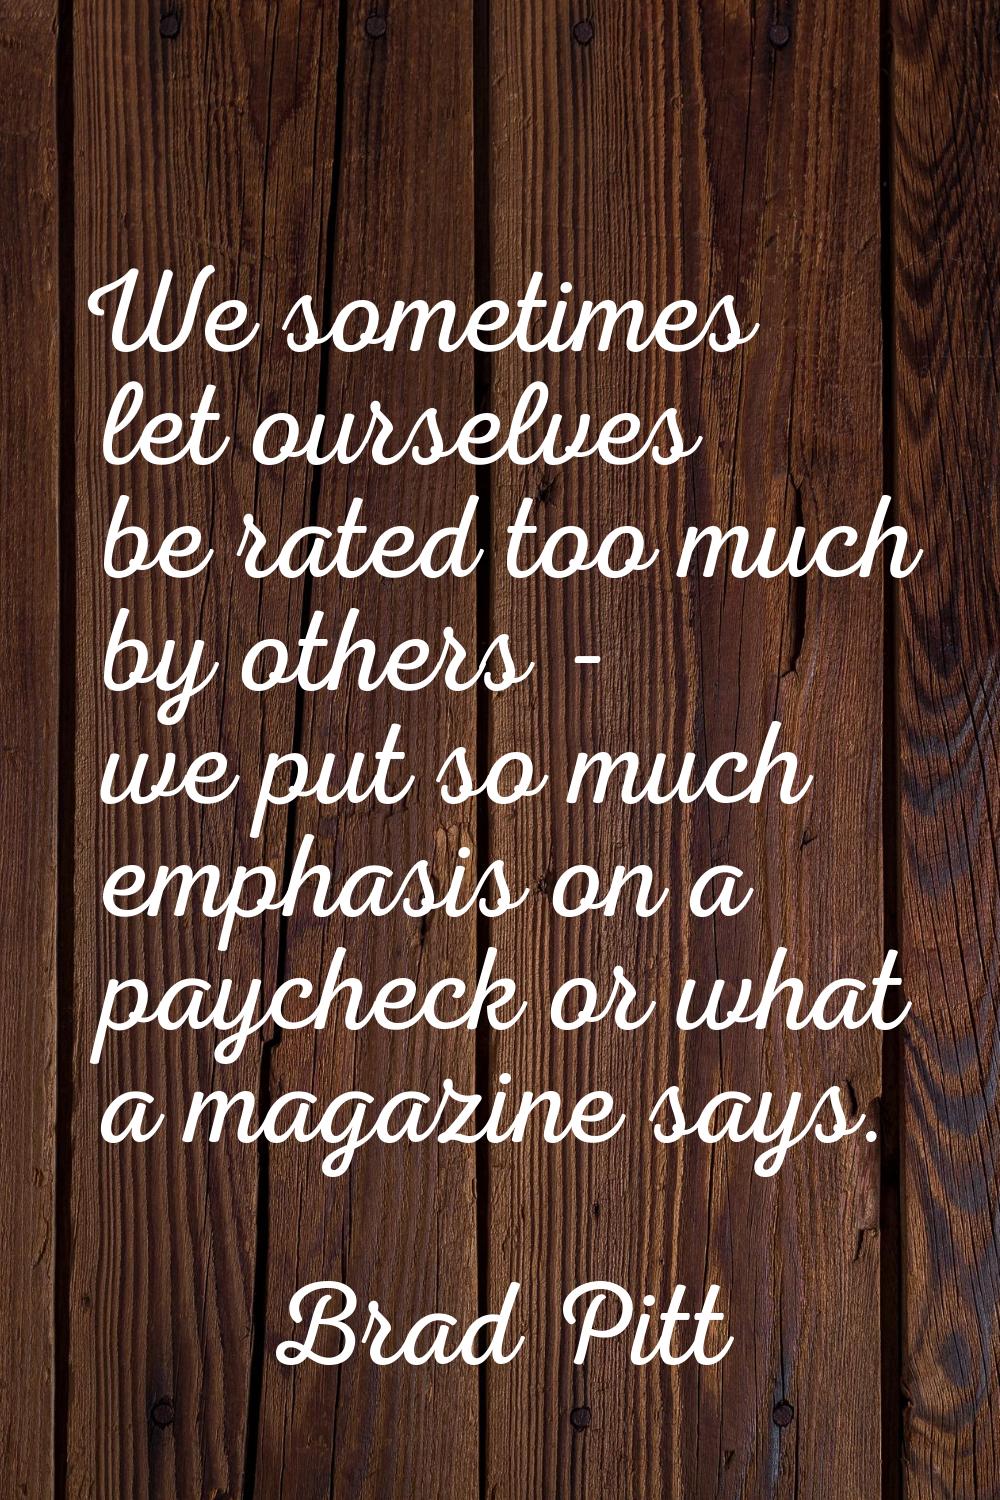 We sometimes let ourselves be rated too much by others - we put so much emphasis on a paycheck or w